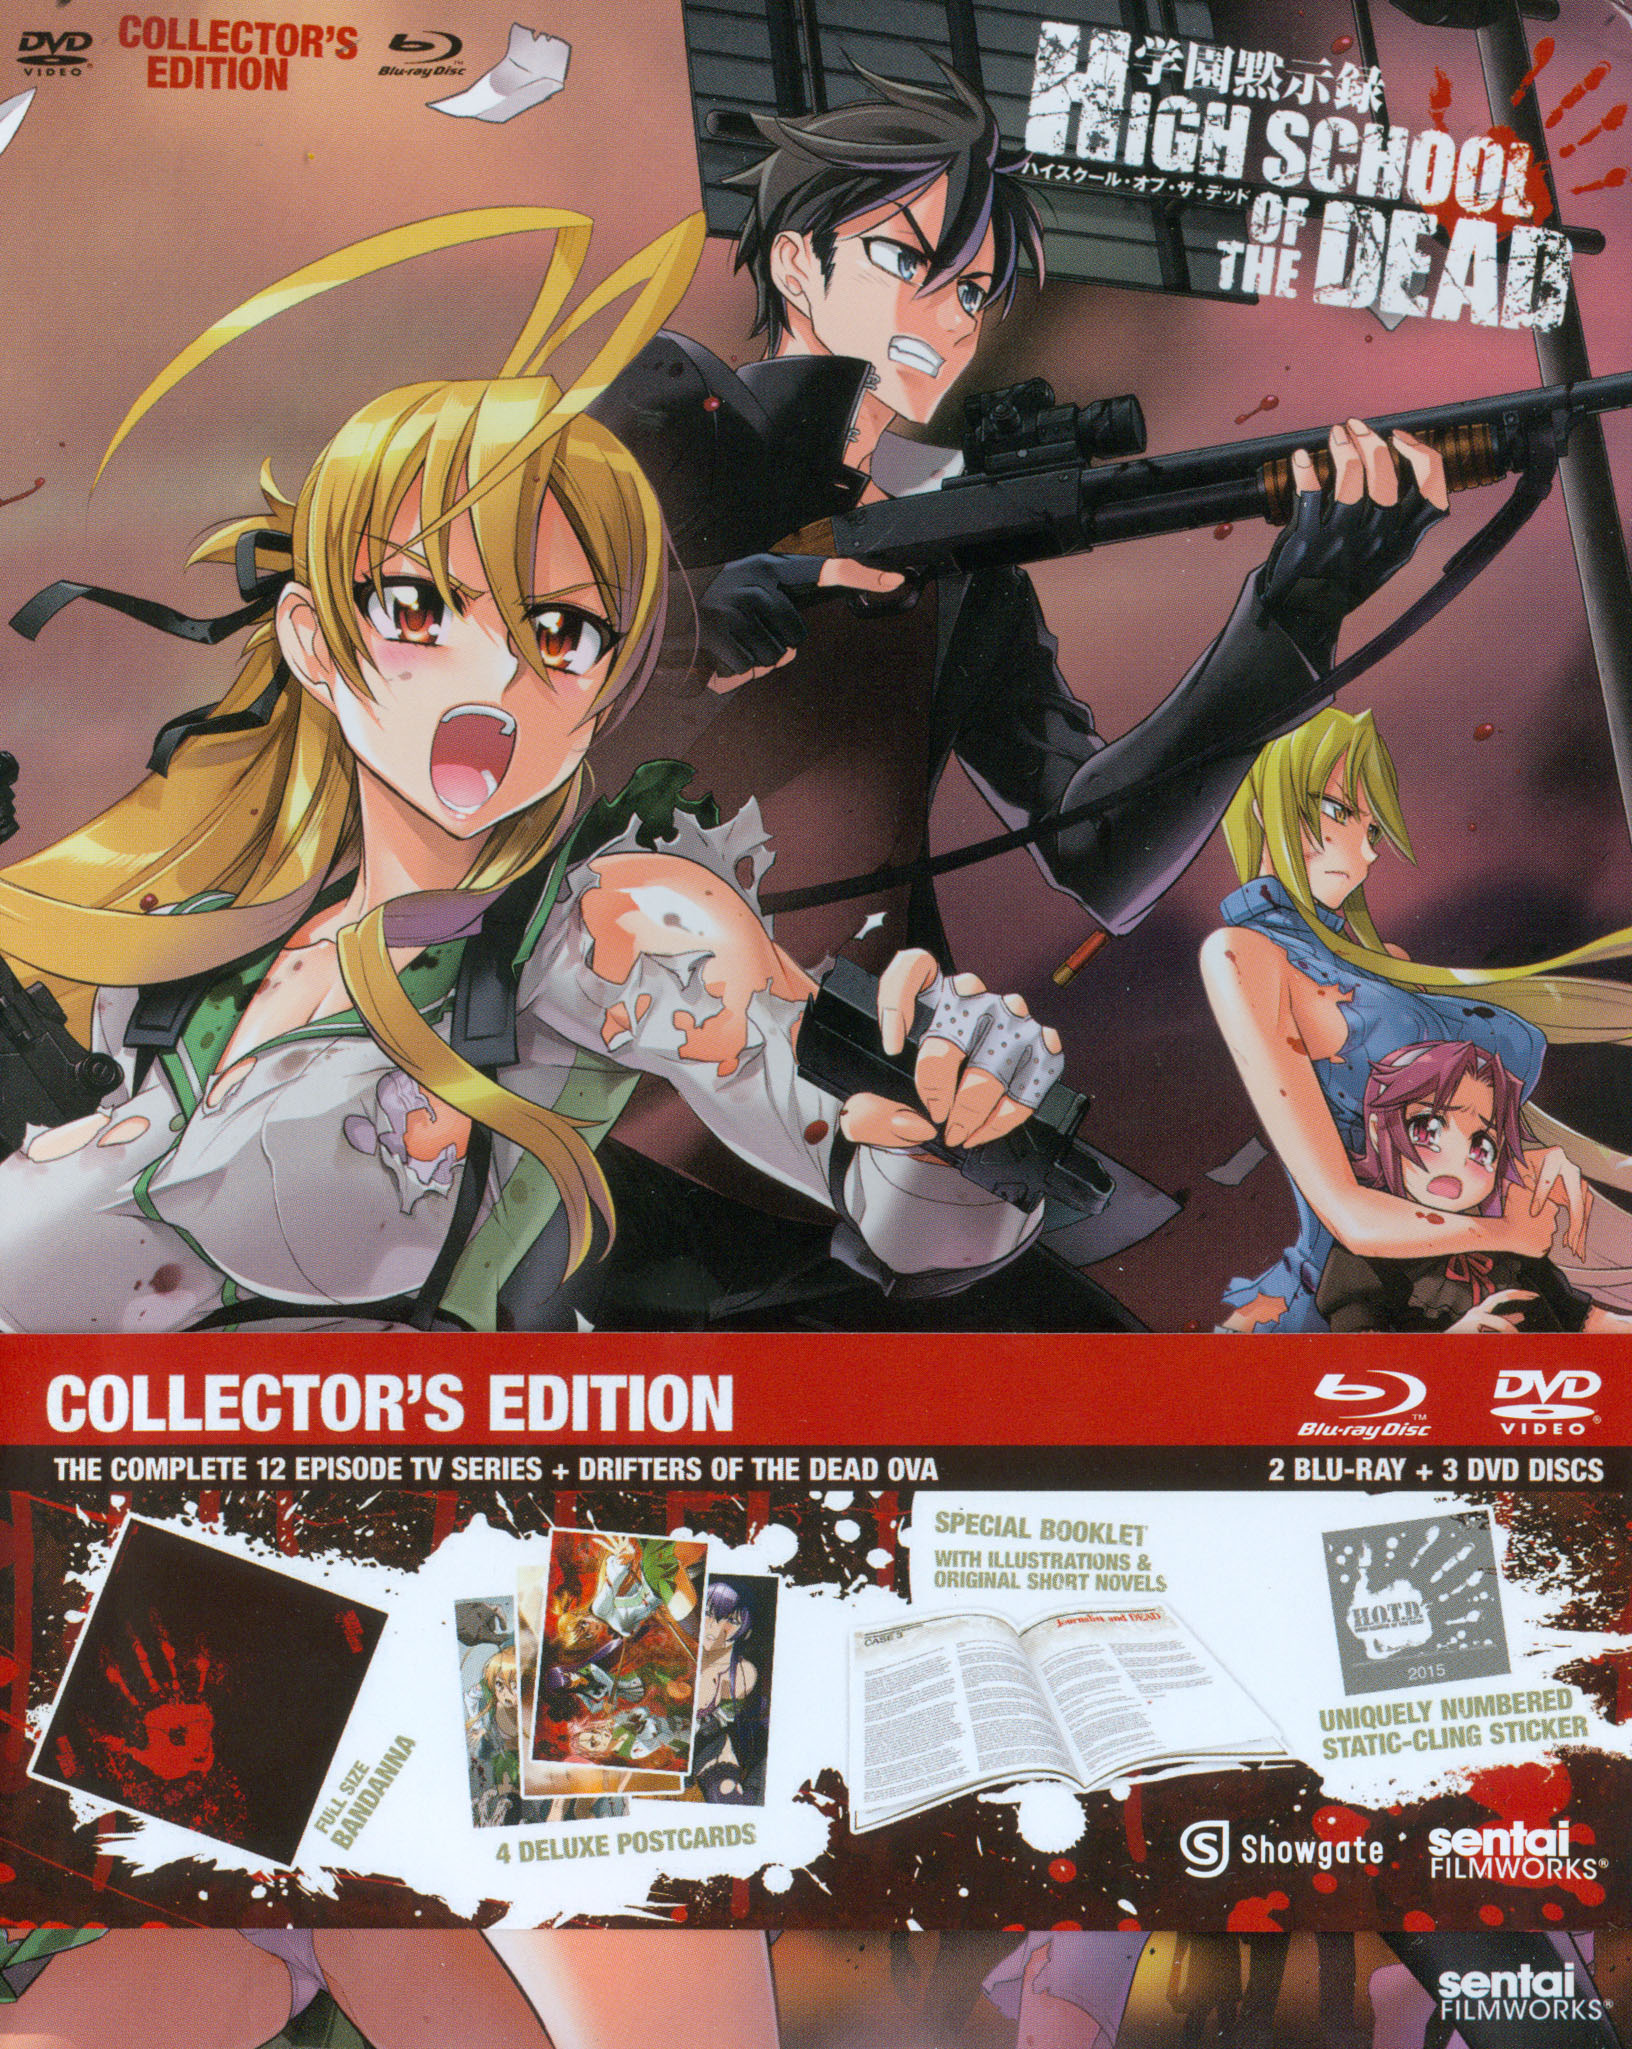 Customer Reviews: High School of the Dead: Complete Collection [2